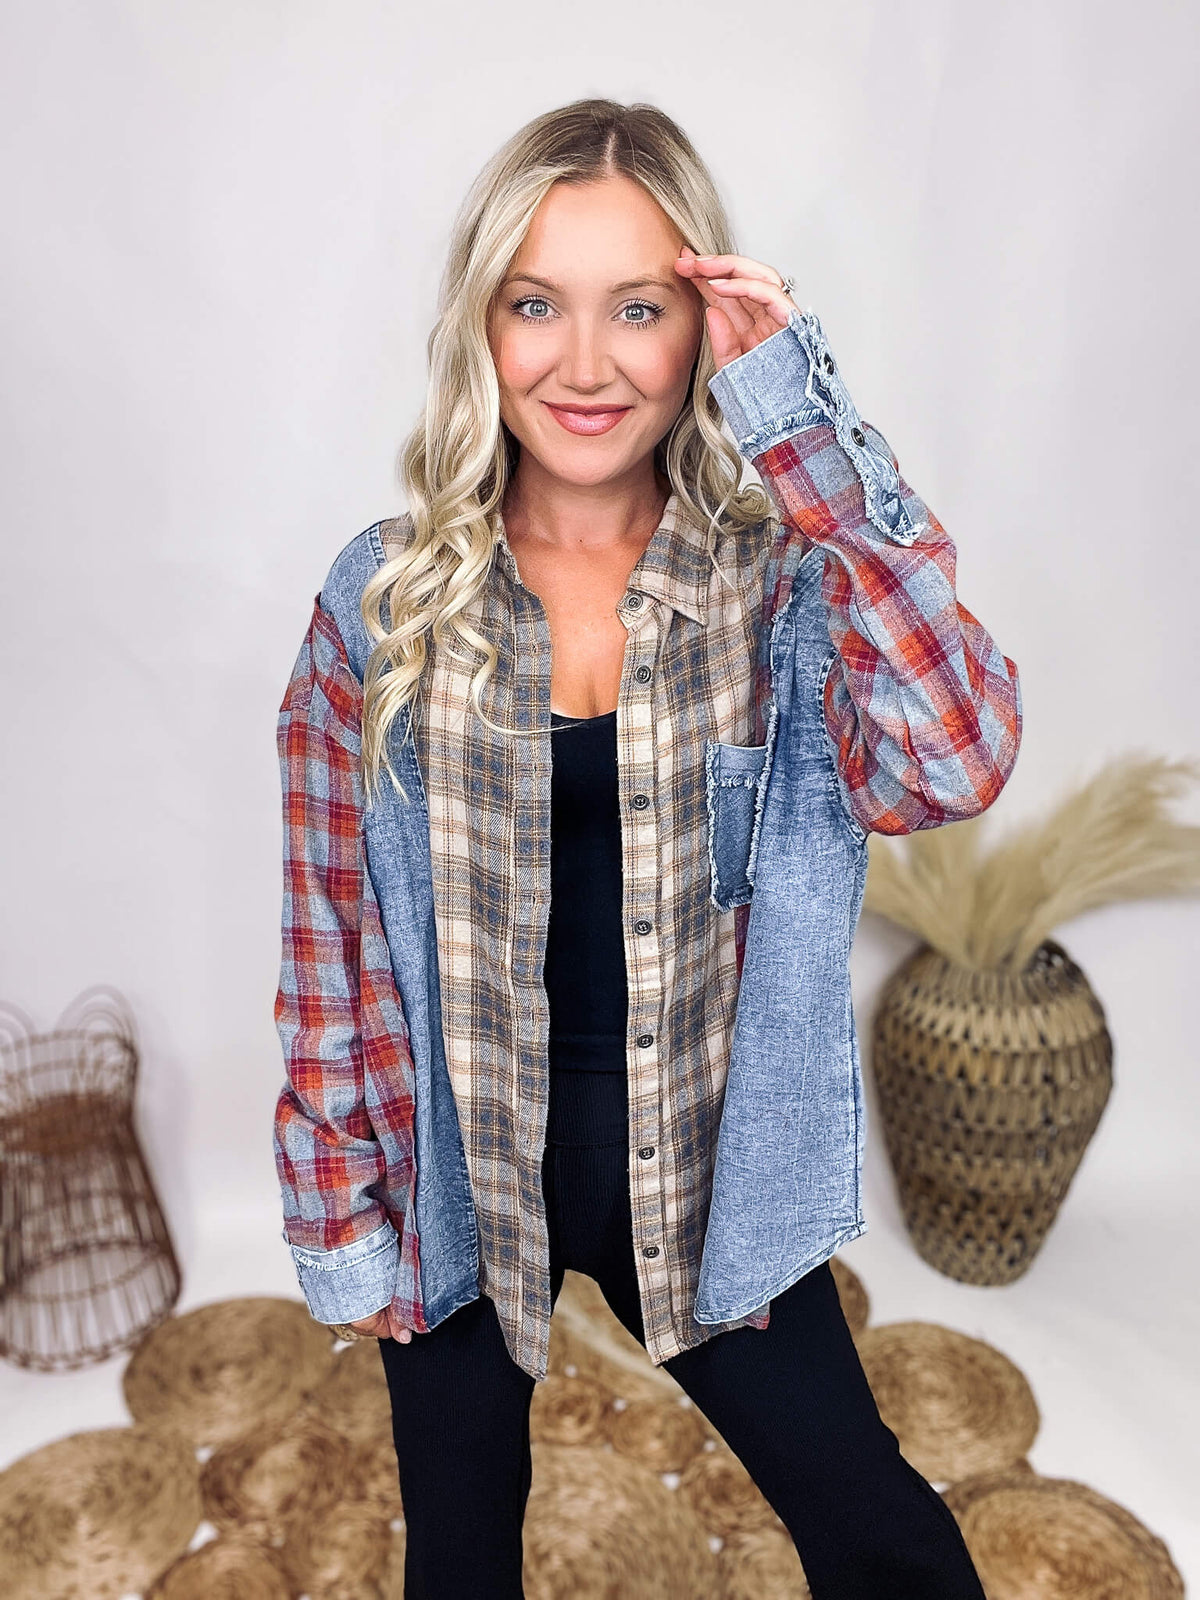 Oddi Denim and Mixed Plaid Collared Button Down Chest Pocket with Frayed Details Button Cuffs with Frayed Details Oversized Fit Soft Material 65% Polyester, 35% Cotton